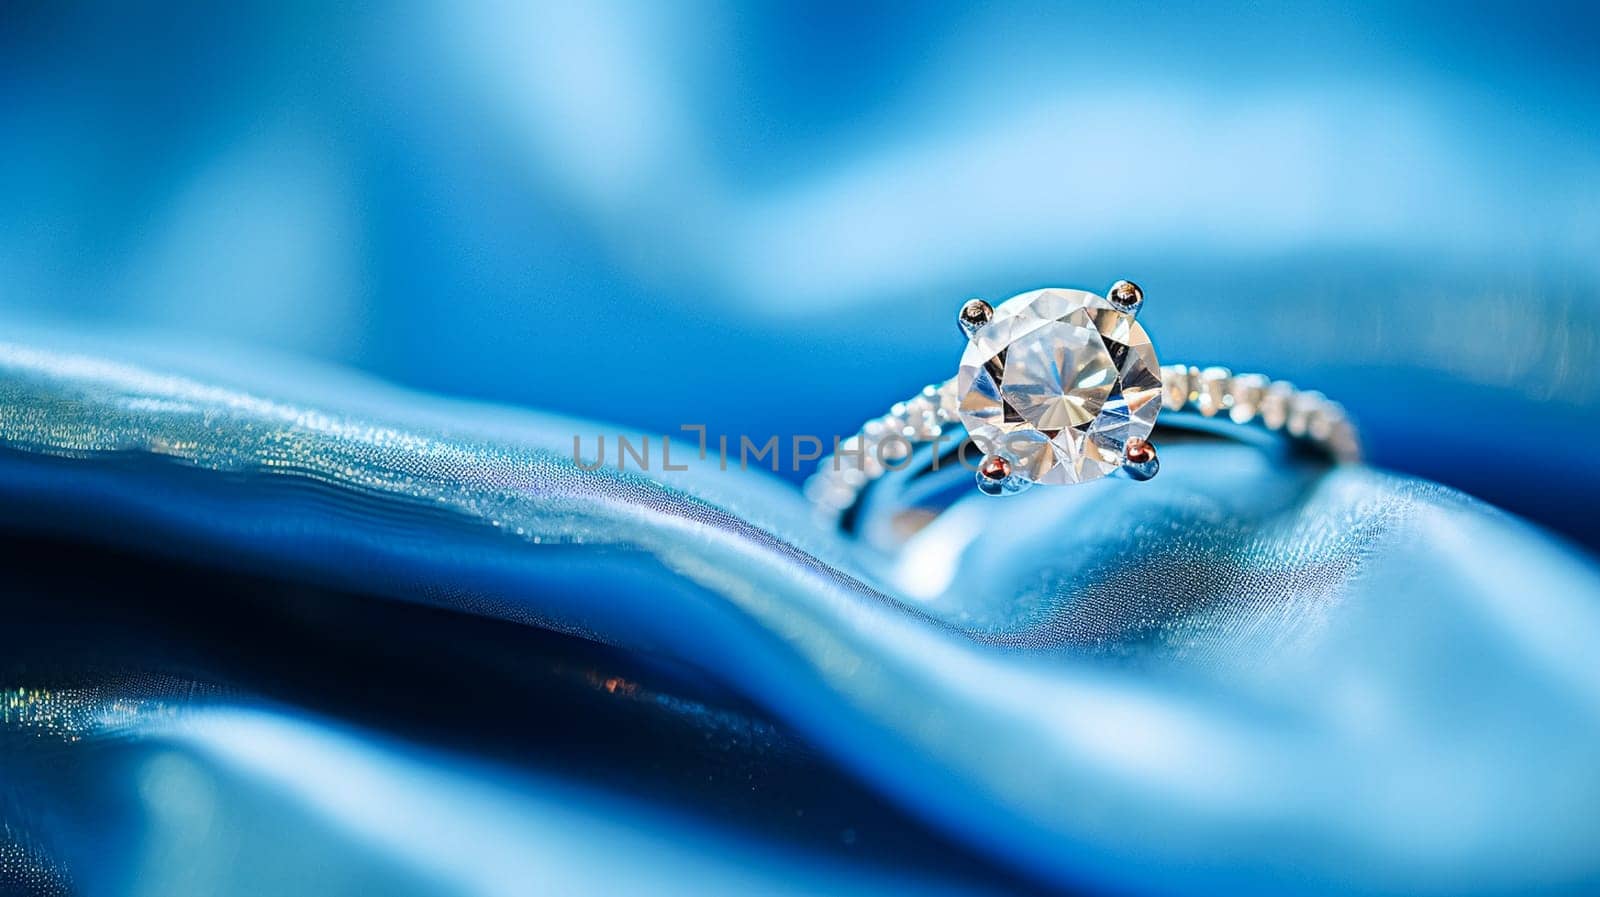 Jewellery, proposal and holiday gift, diamond engagement ring on blue silk fabric, symbol of love, romance and commitment inspiration